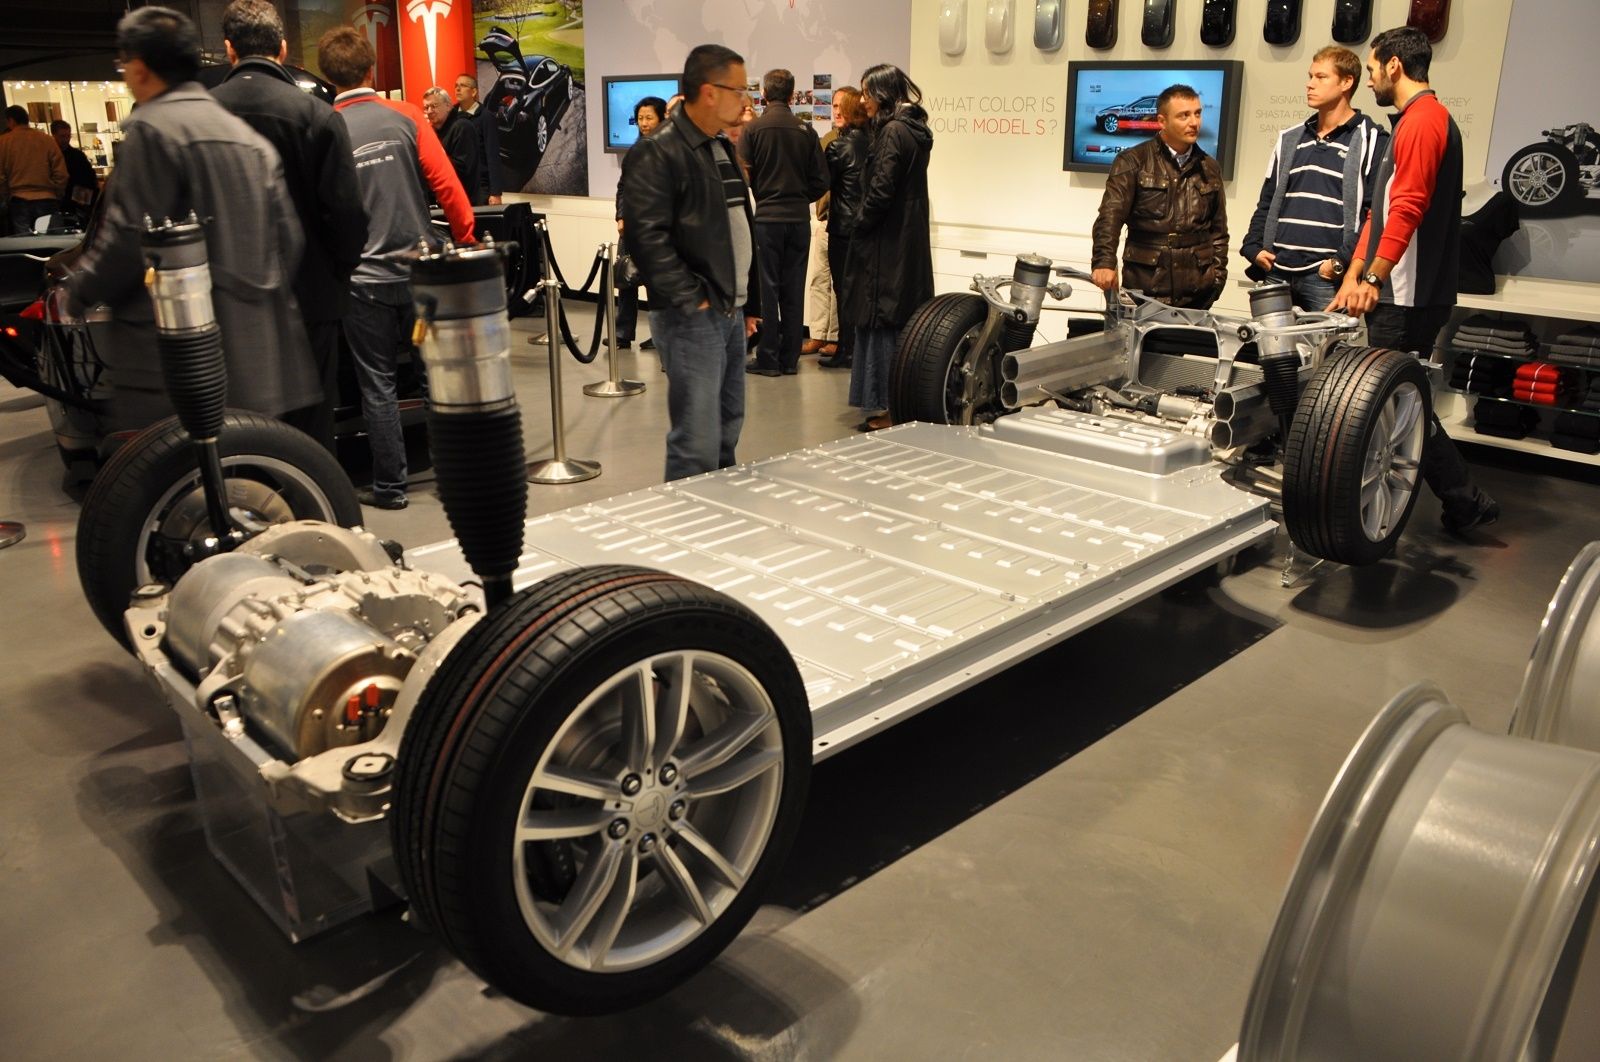 tesla-model-s-lithium-ion-battery-pack-in-rolling-chassis-photo-martin-gillet-via-flickr_10048...jpg